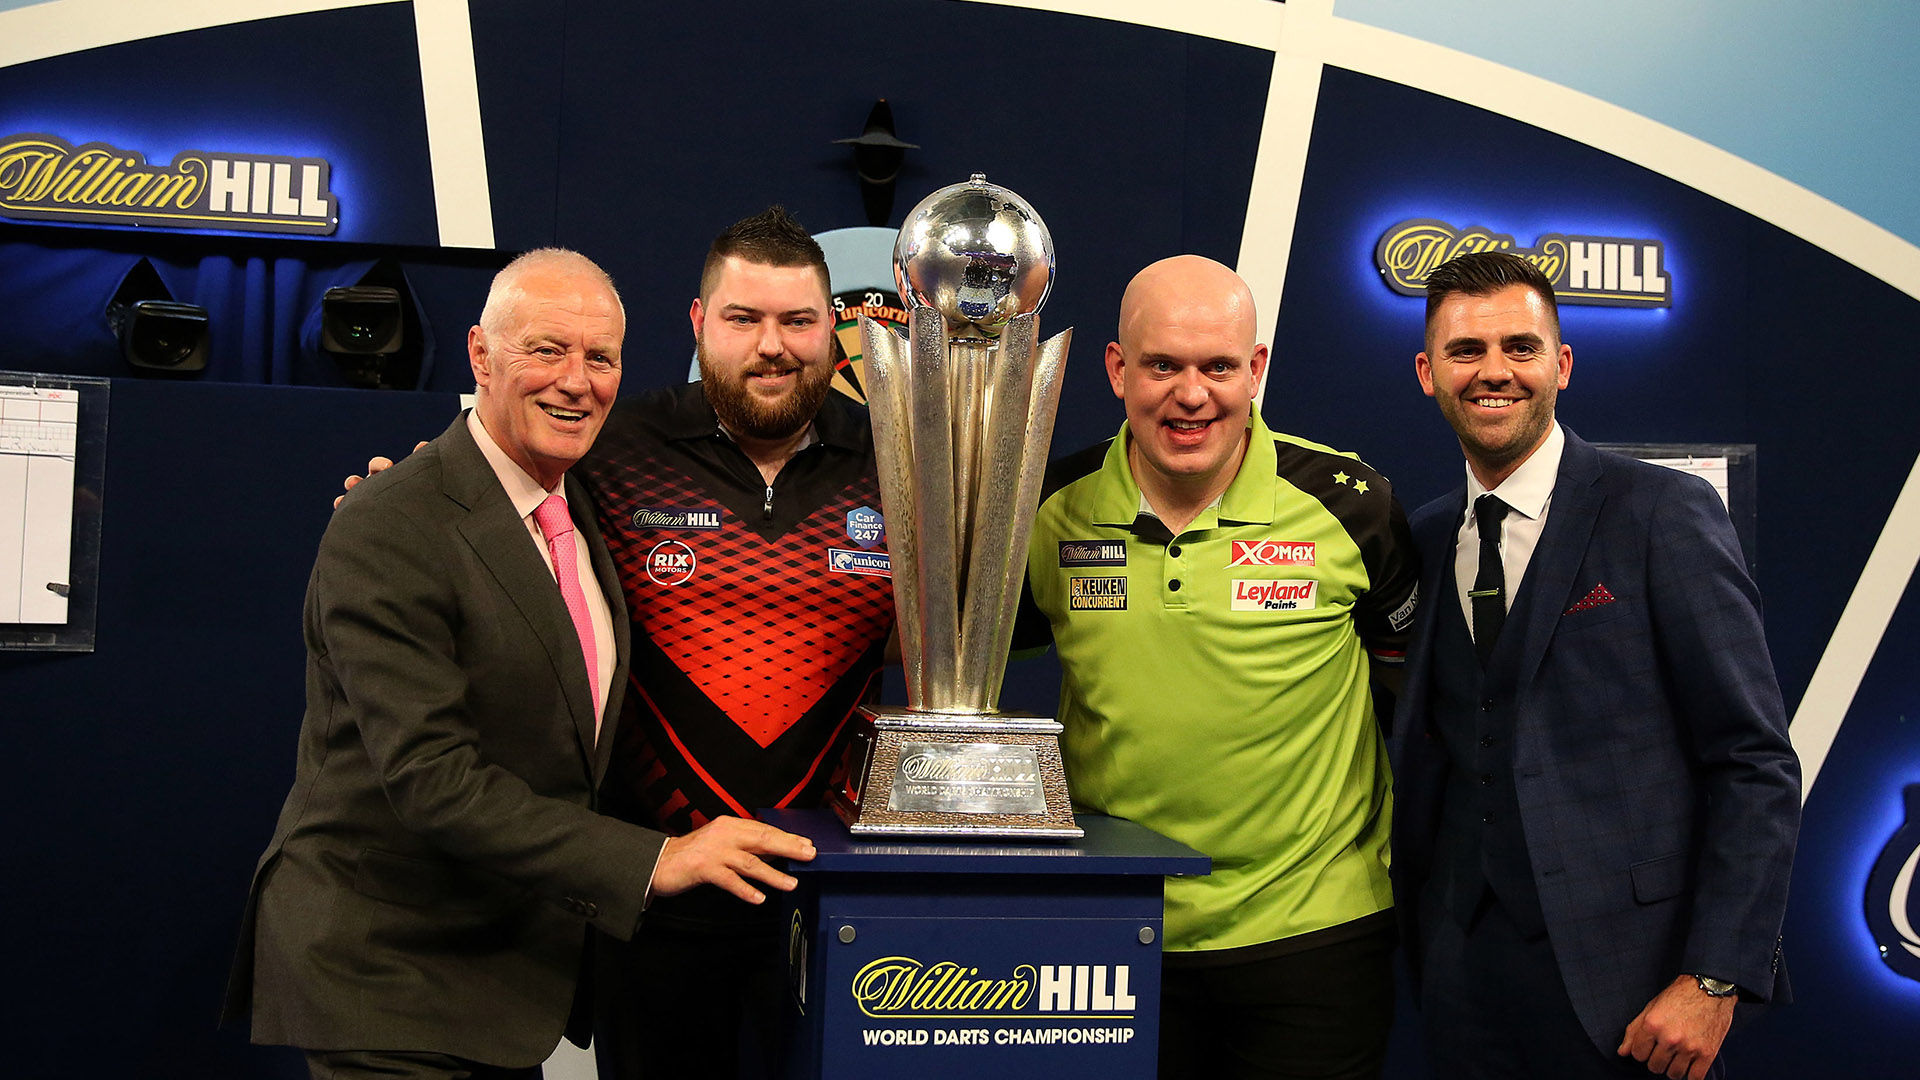 PDC World Championship 2019: Draw, schedule, betting odds, results & live Sky Sports coverage details